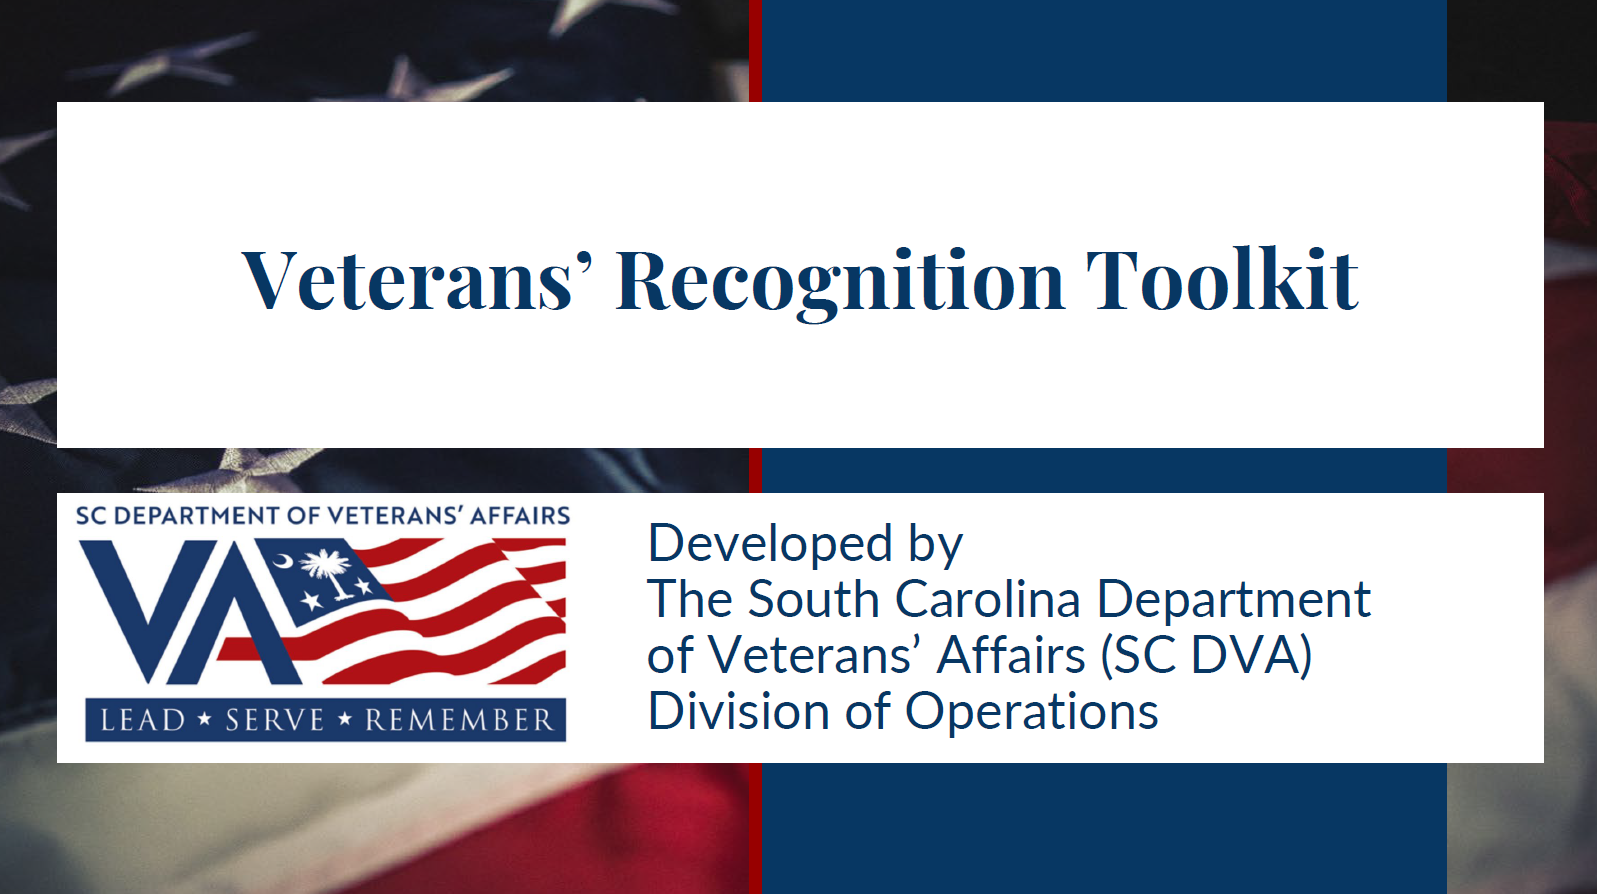 Veterans' Recognition Toolkit